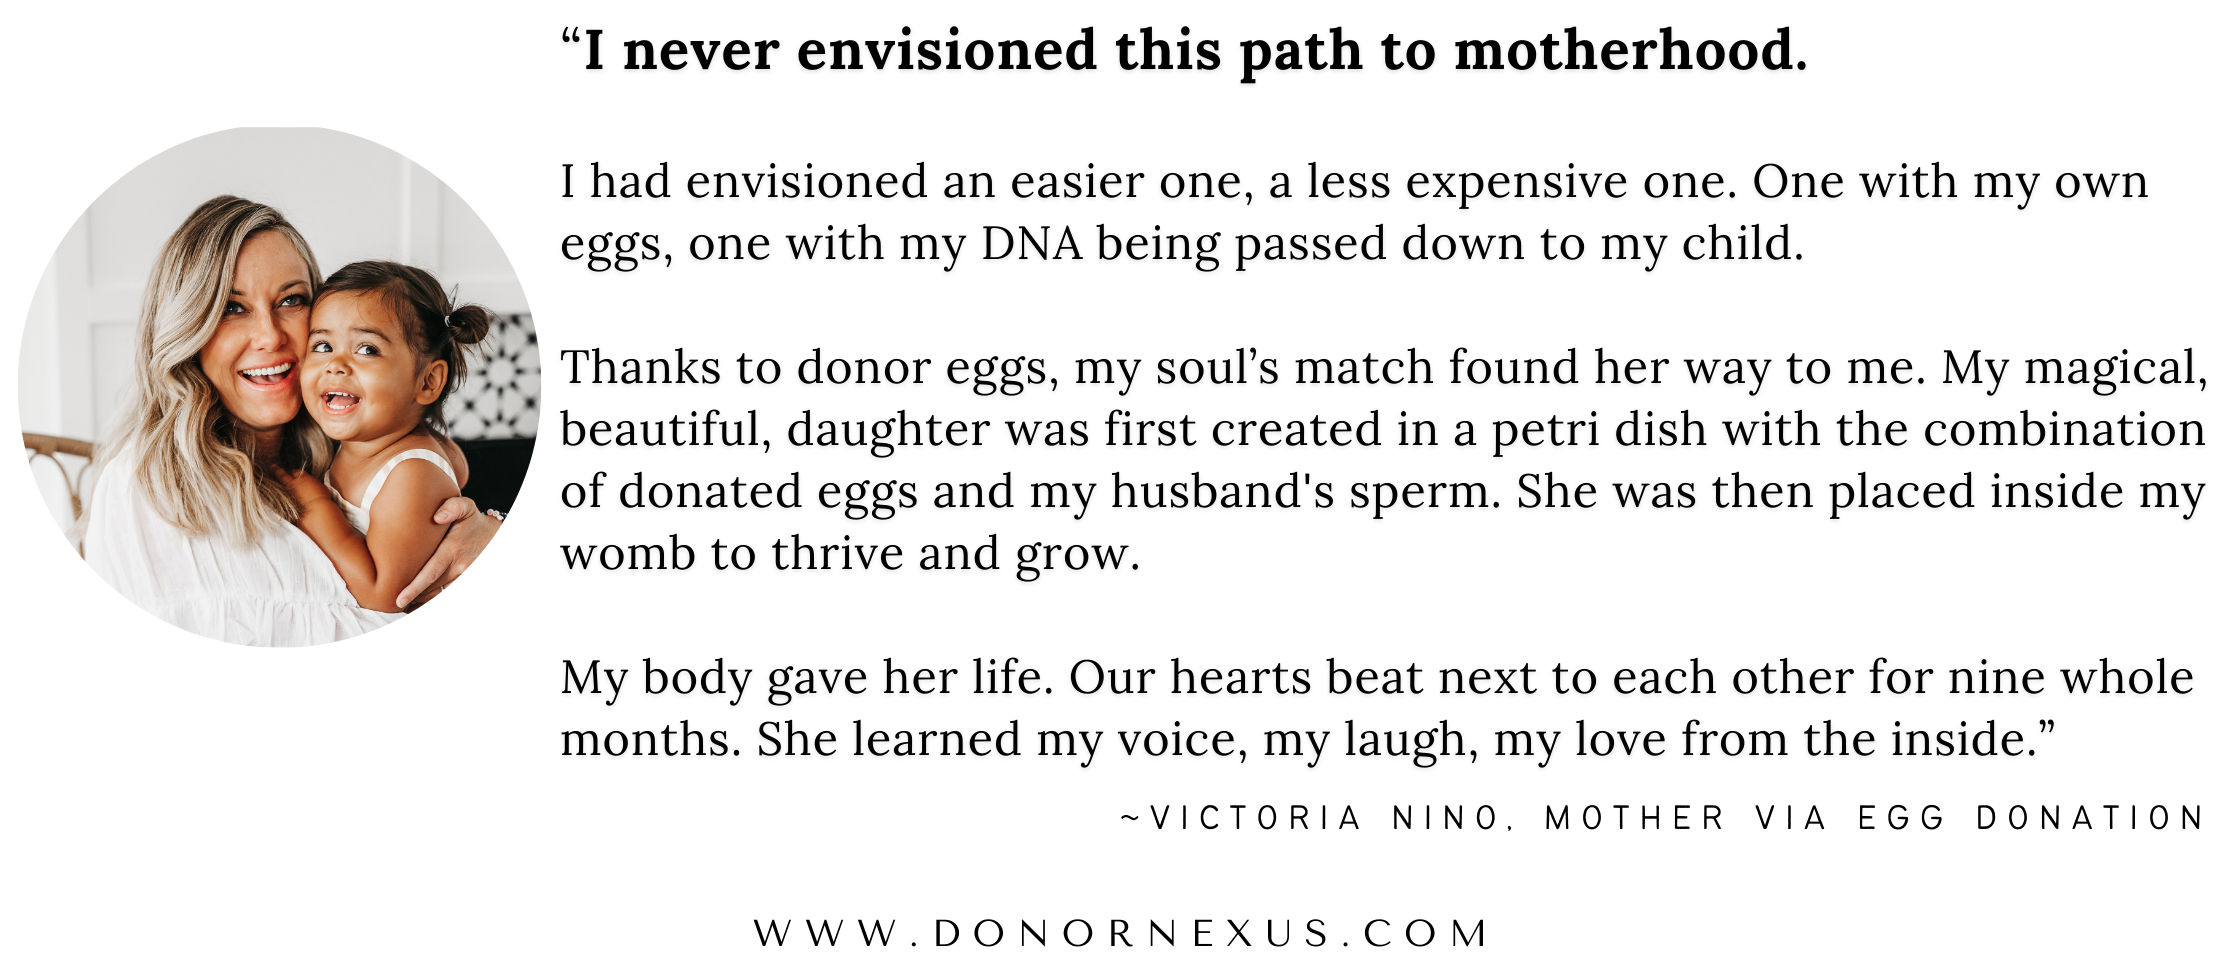 Endometriosis and infertility: Donor Egg IVF provides an alternative path to parenthood. Learn more in this blog.